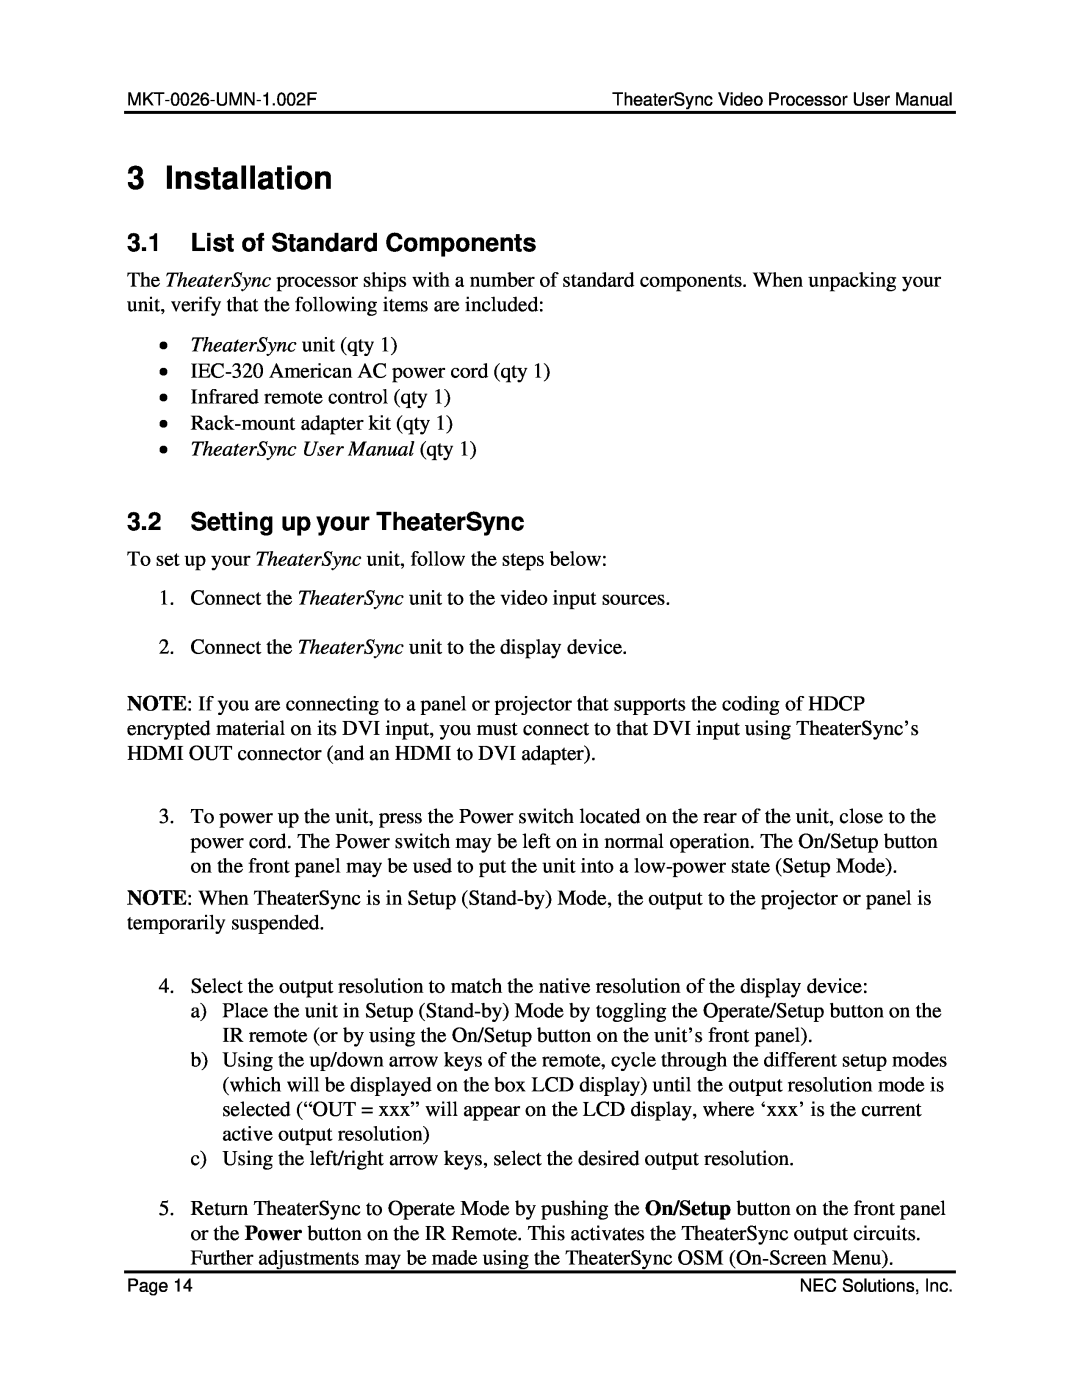 NEC TheaterSync Video Processor user manual Installation, 3.1List of Standard Components, 3.2Setting up your TheaterSync 